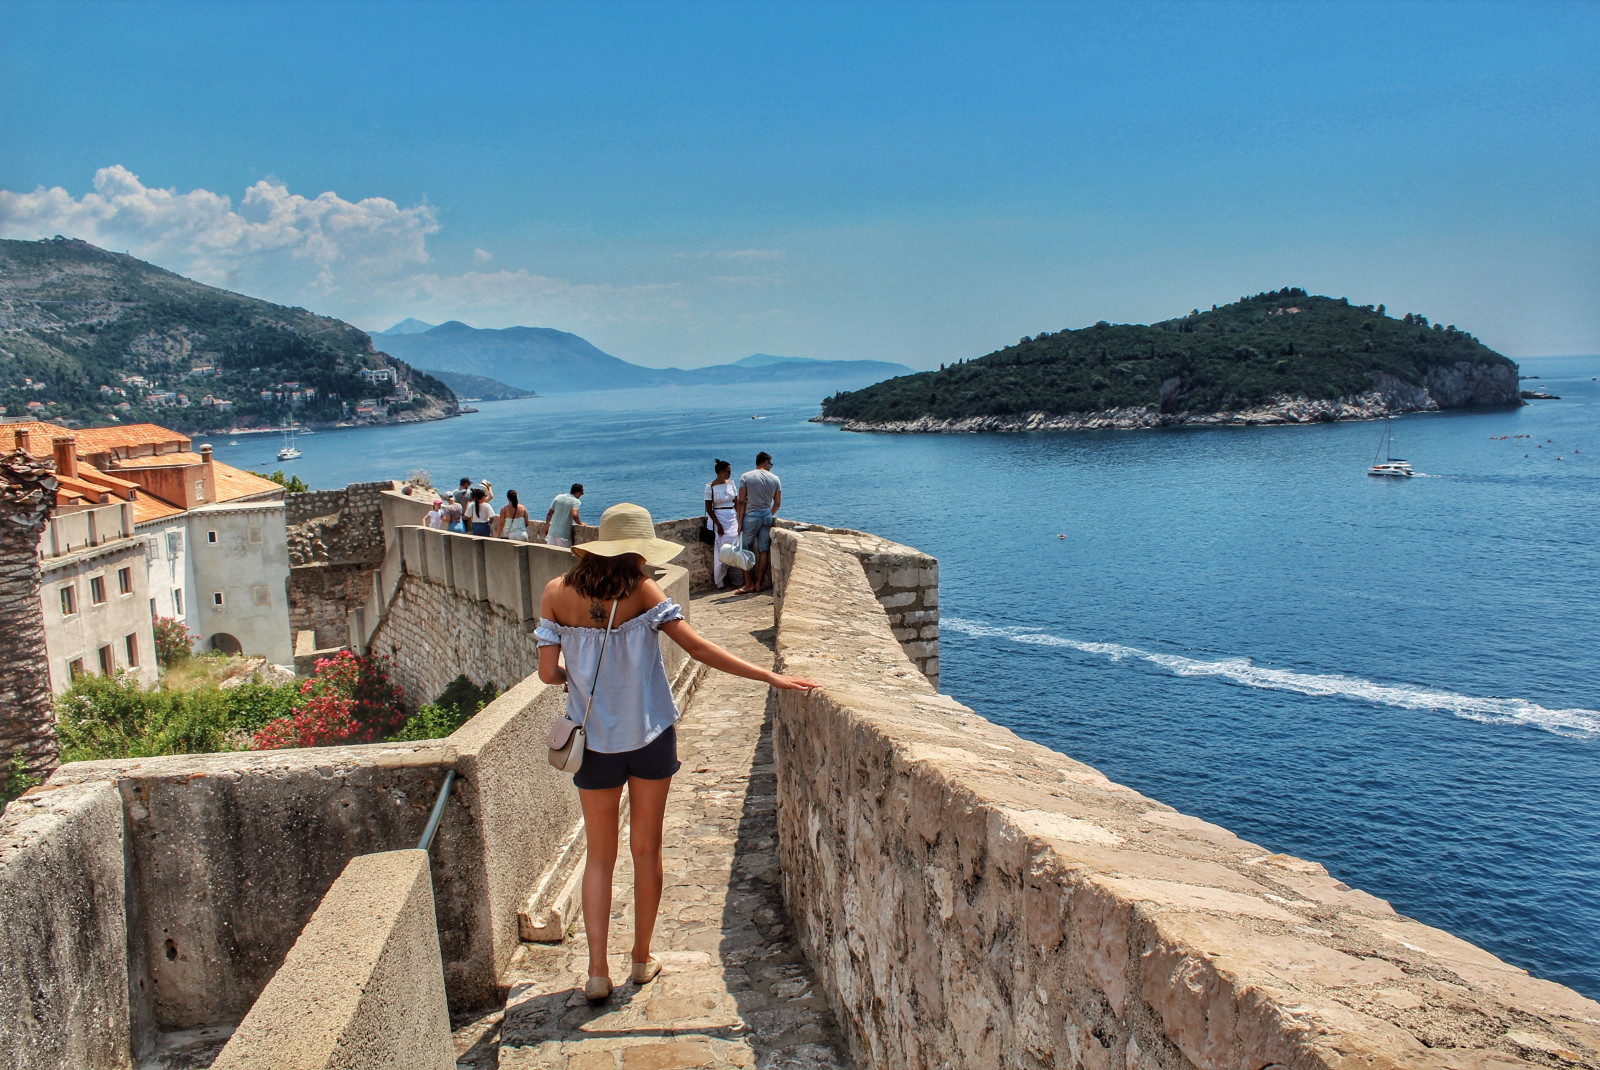 Walking the wall around the old town of Dubrovnik. 